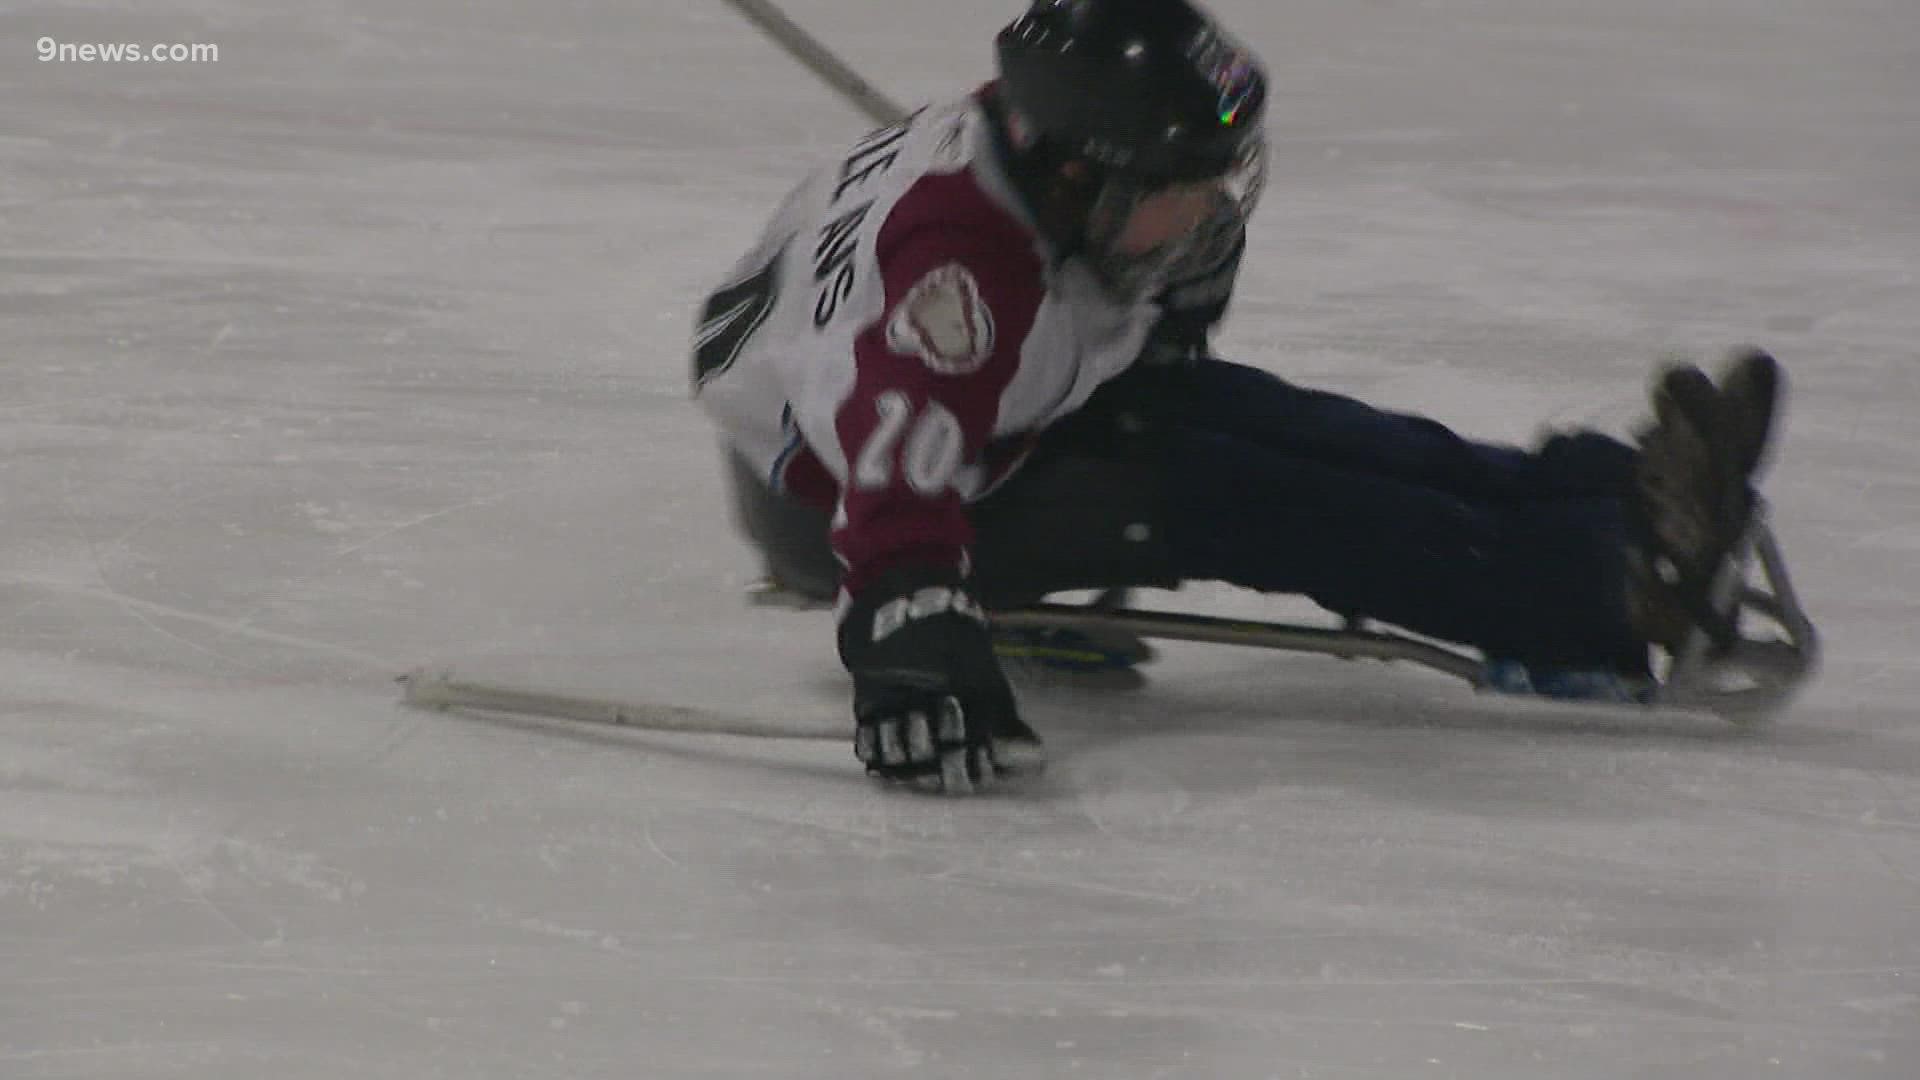 One day, nine-year-old Mitchell Wennberg has gold medal dreams with Team USA's Paralympic sled hockey team.